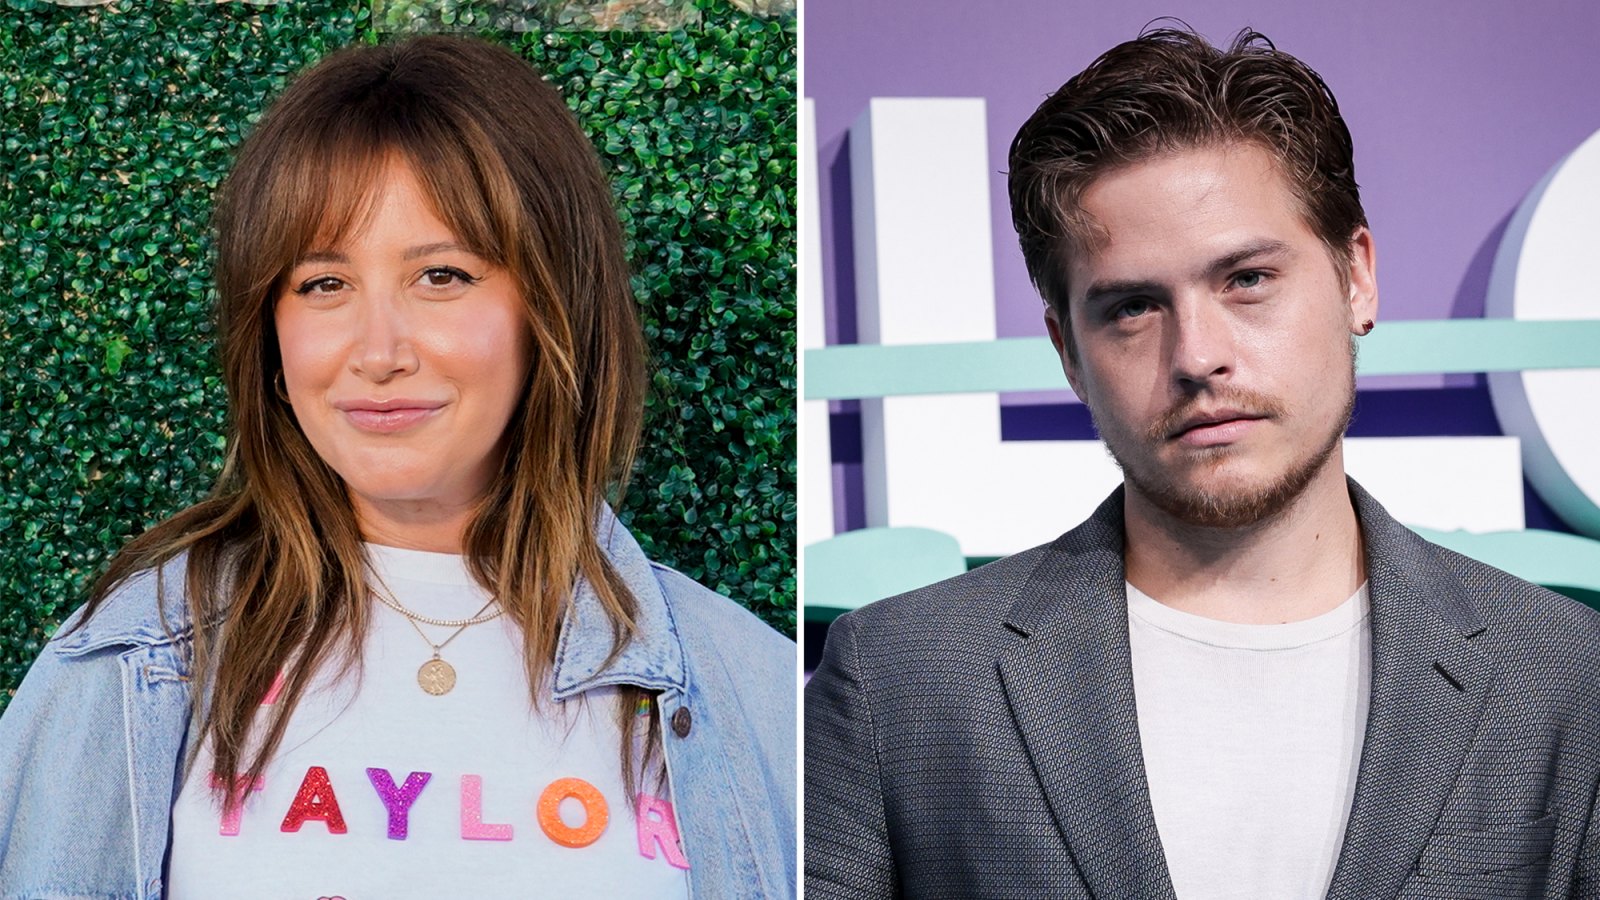 Ashley Tisdale Has a Mini Suite Life Reunion With Brother Dylan Sprouse